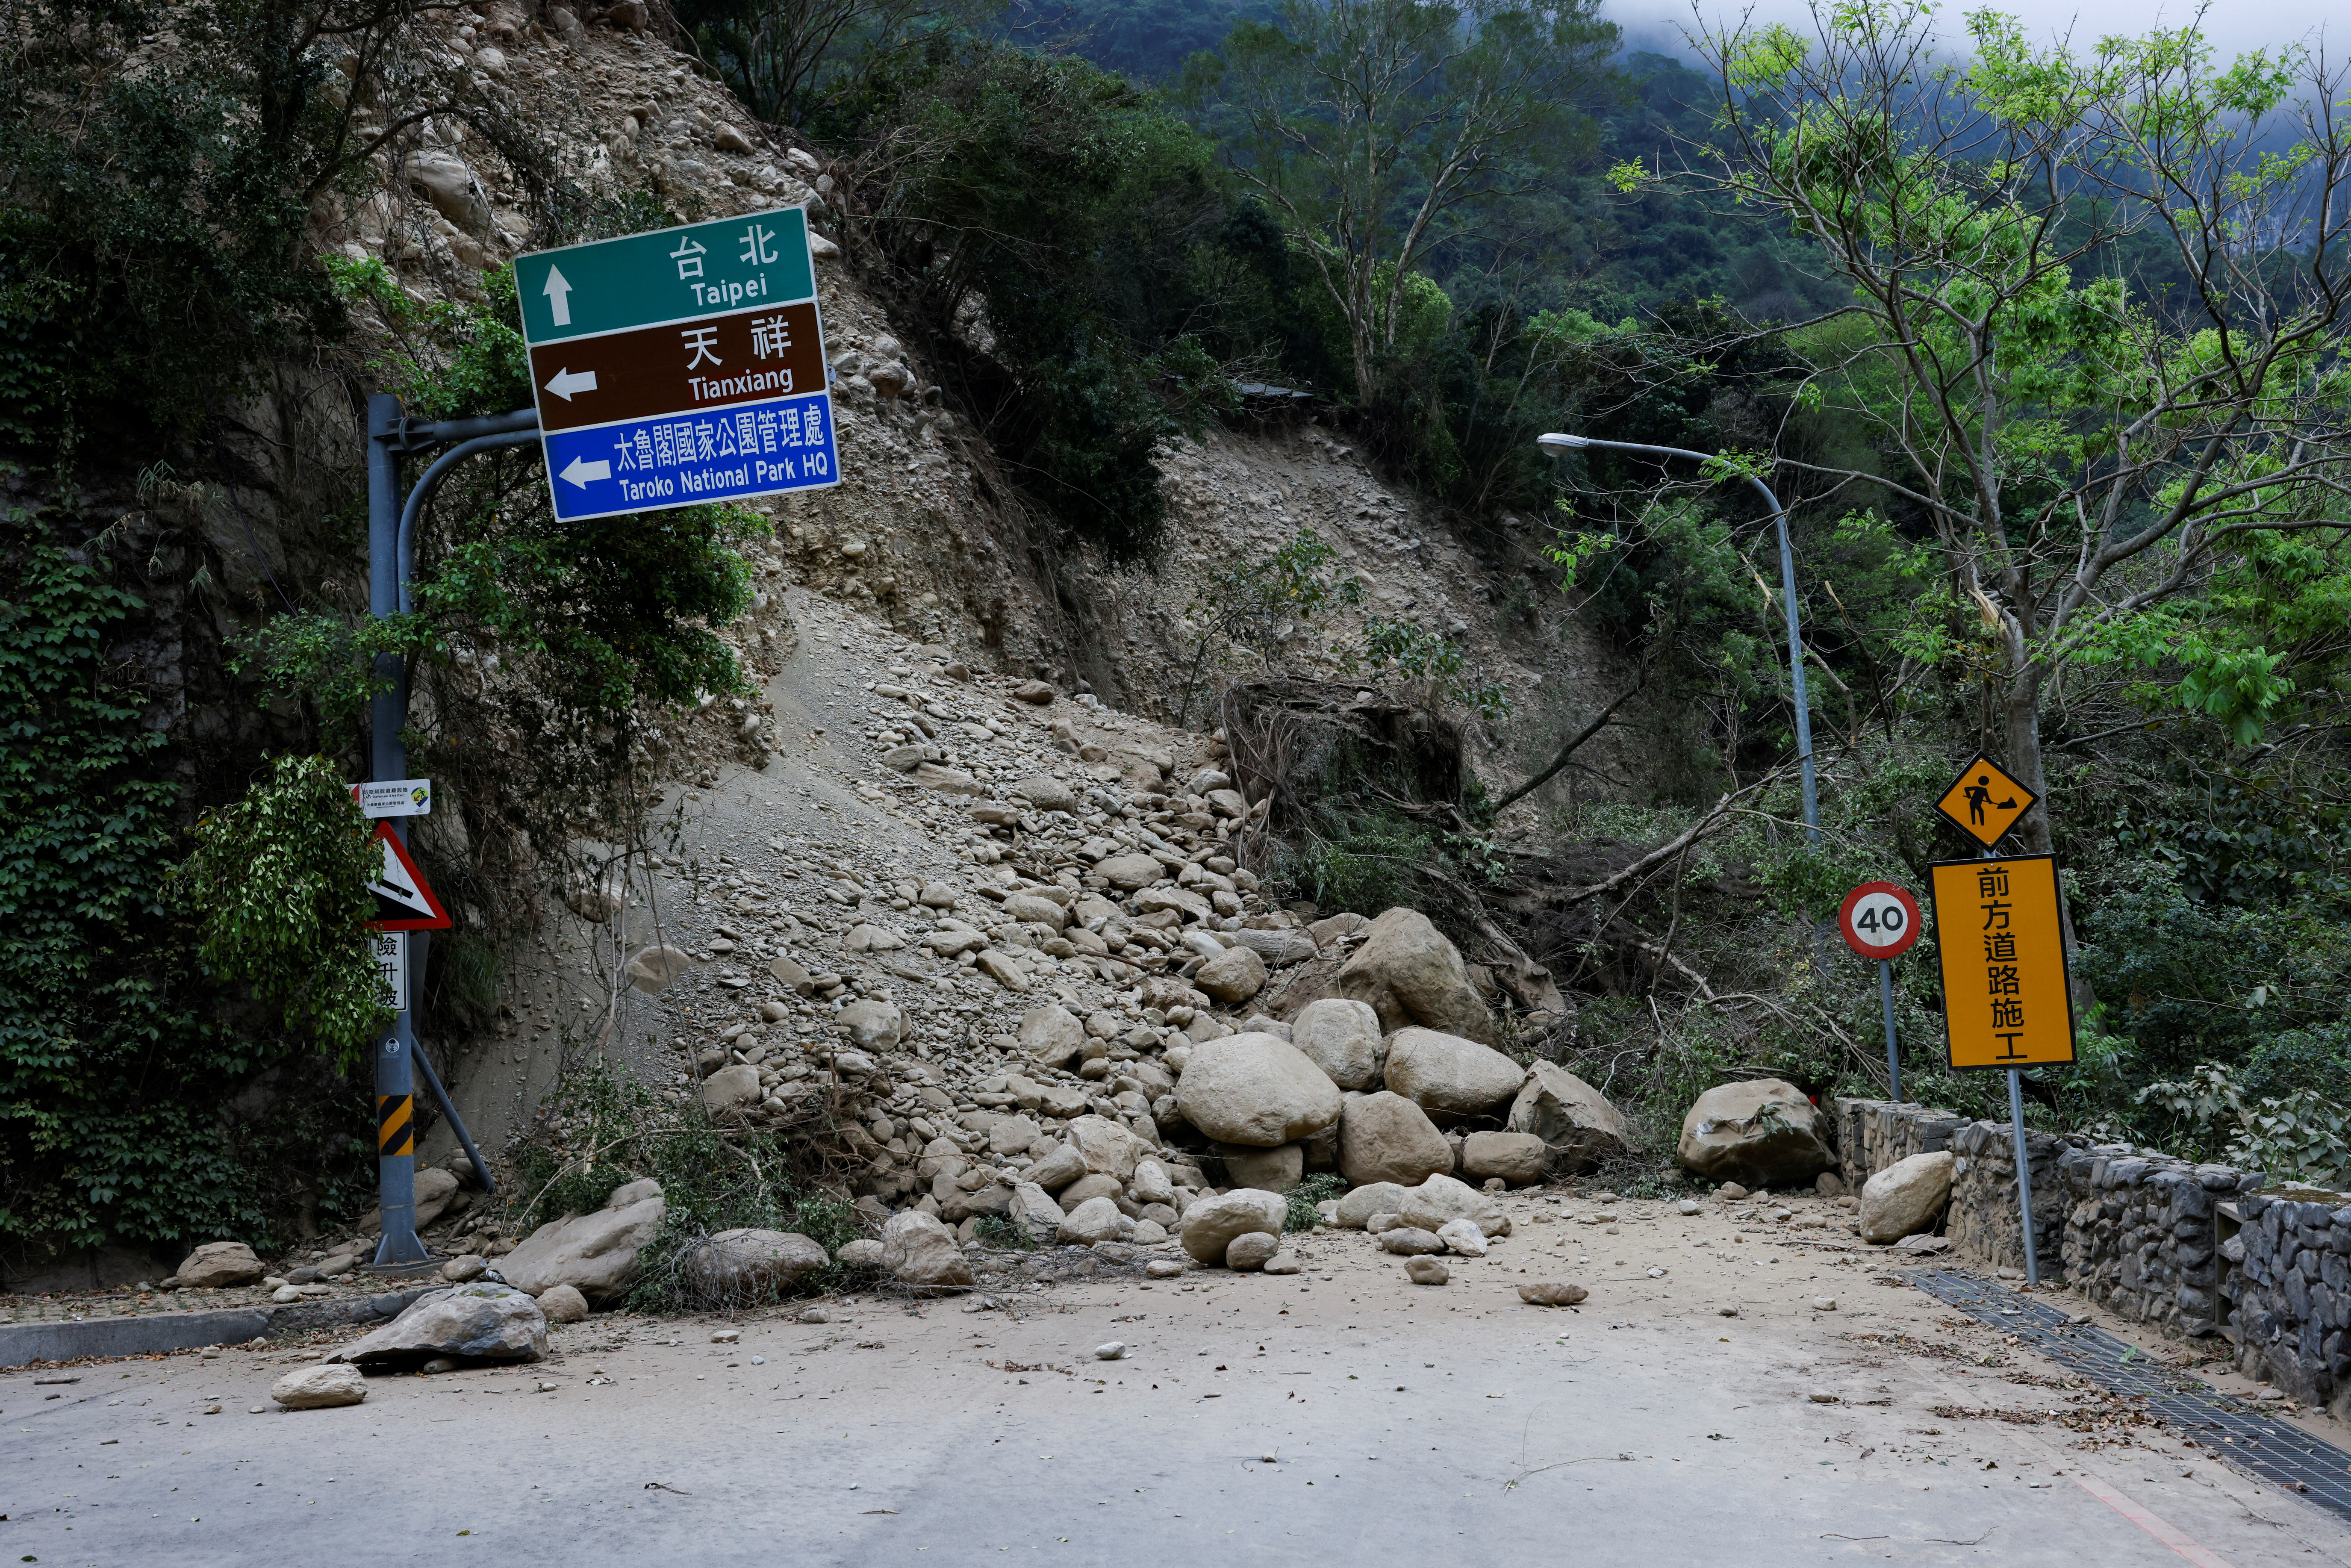 Aftermath of an earthquake, in Hualien